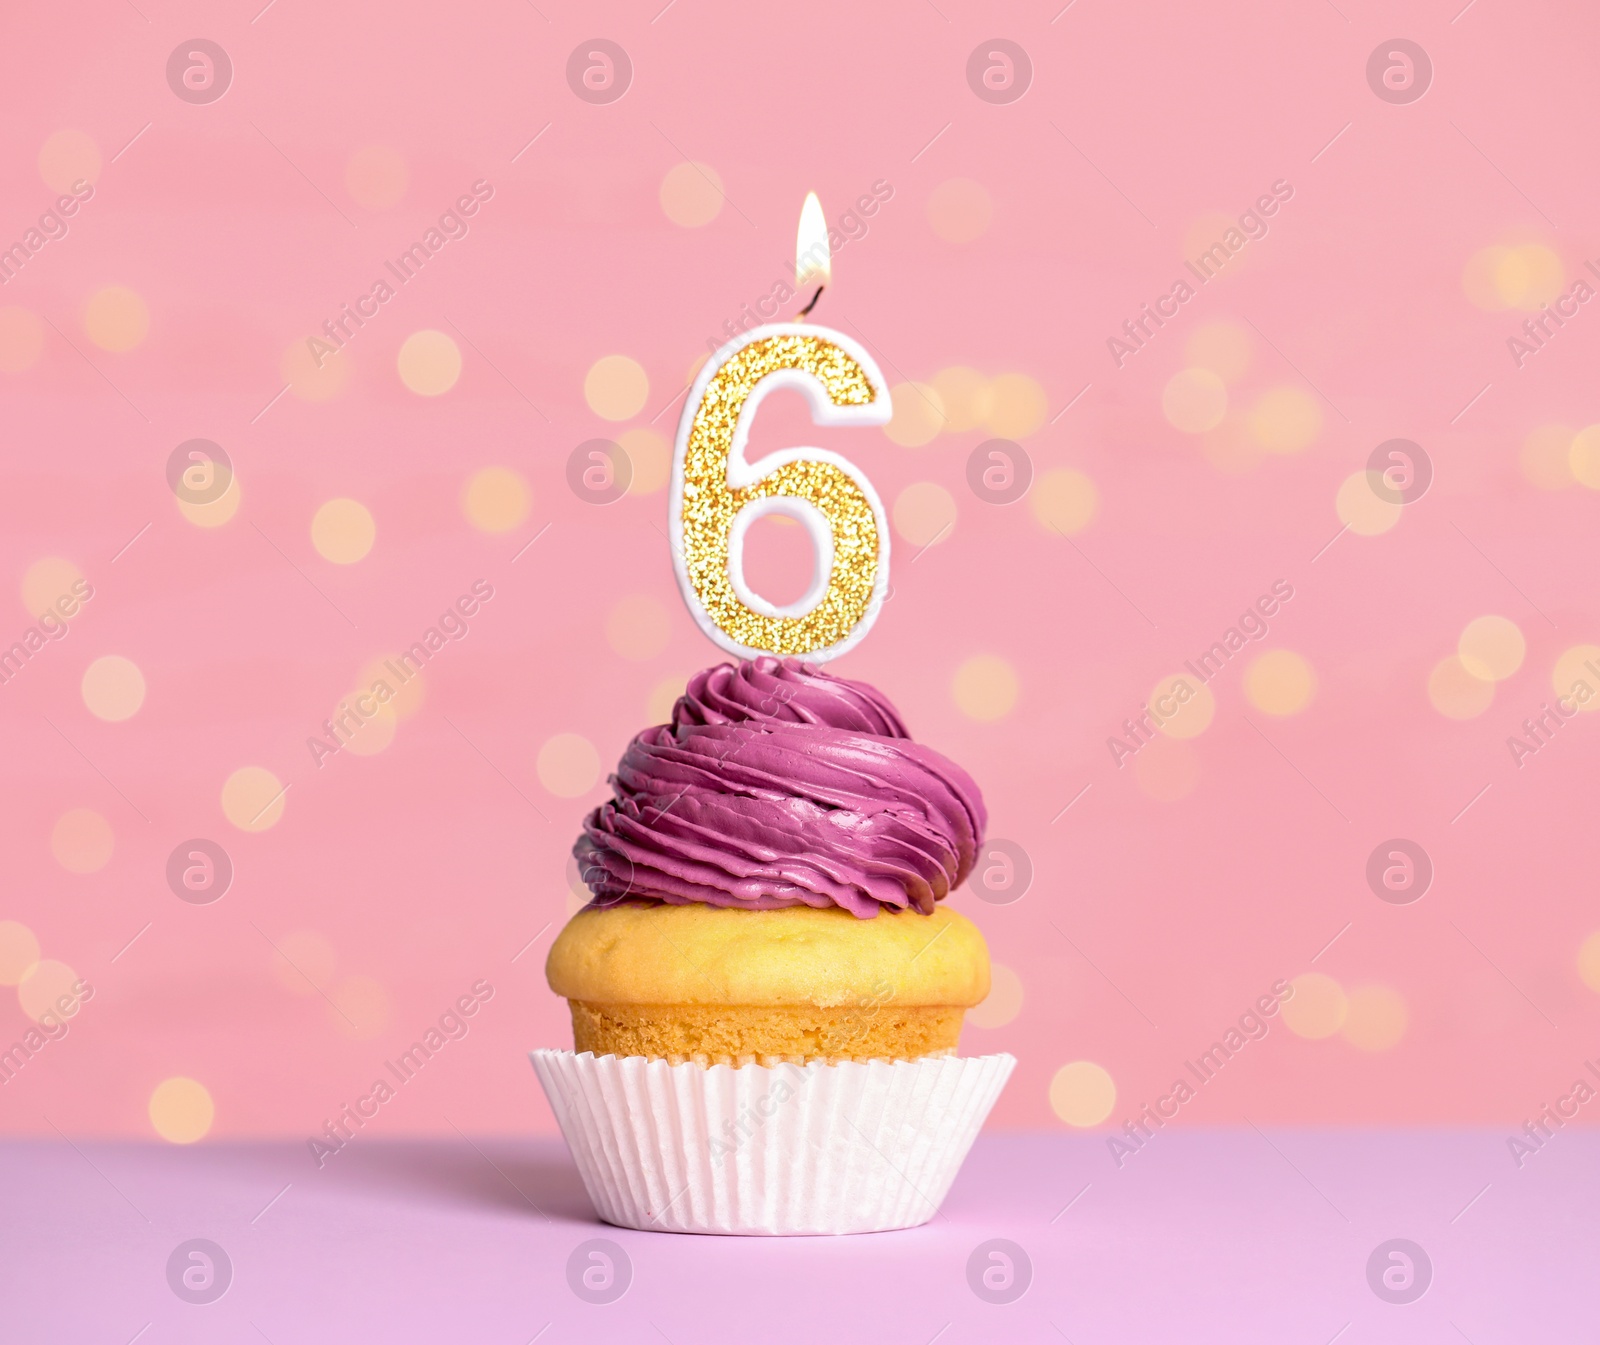 Photo of Birthday cupcake with number six candle on table against festive lights